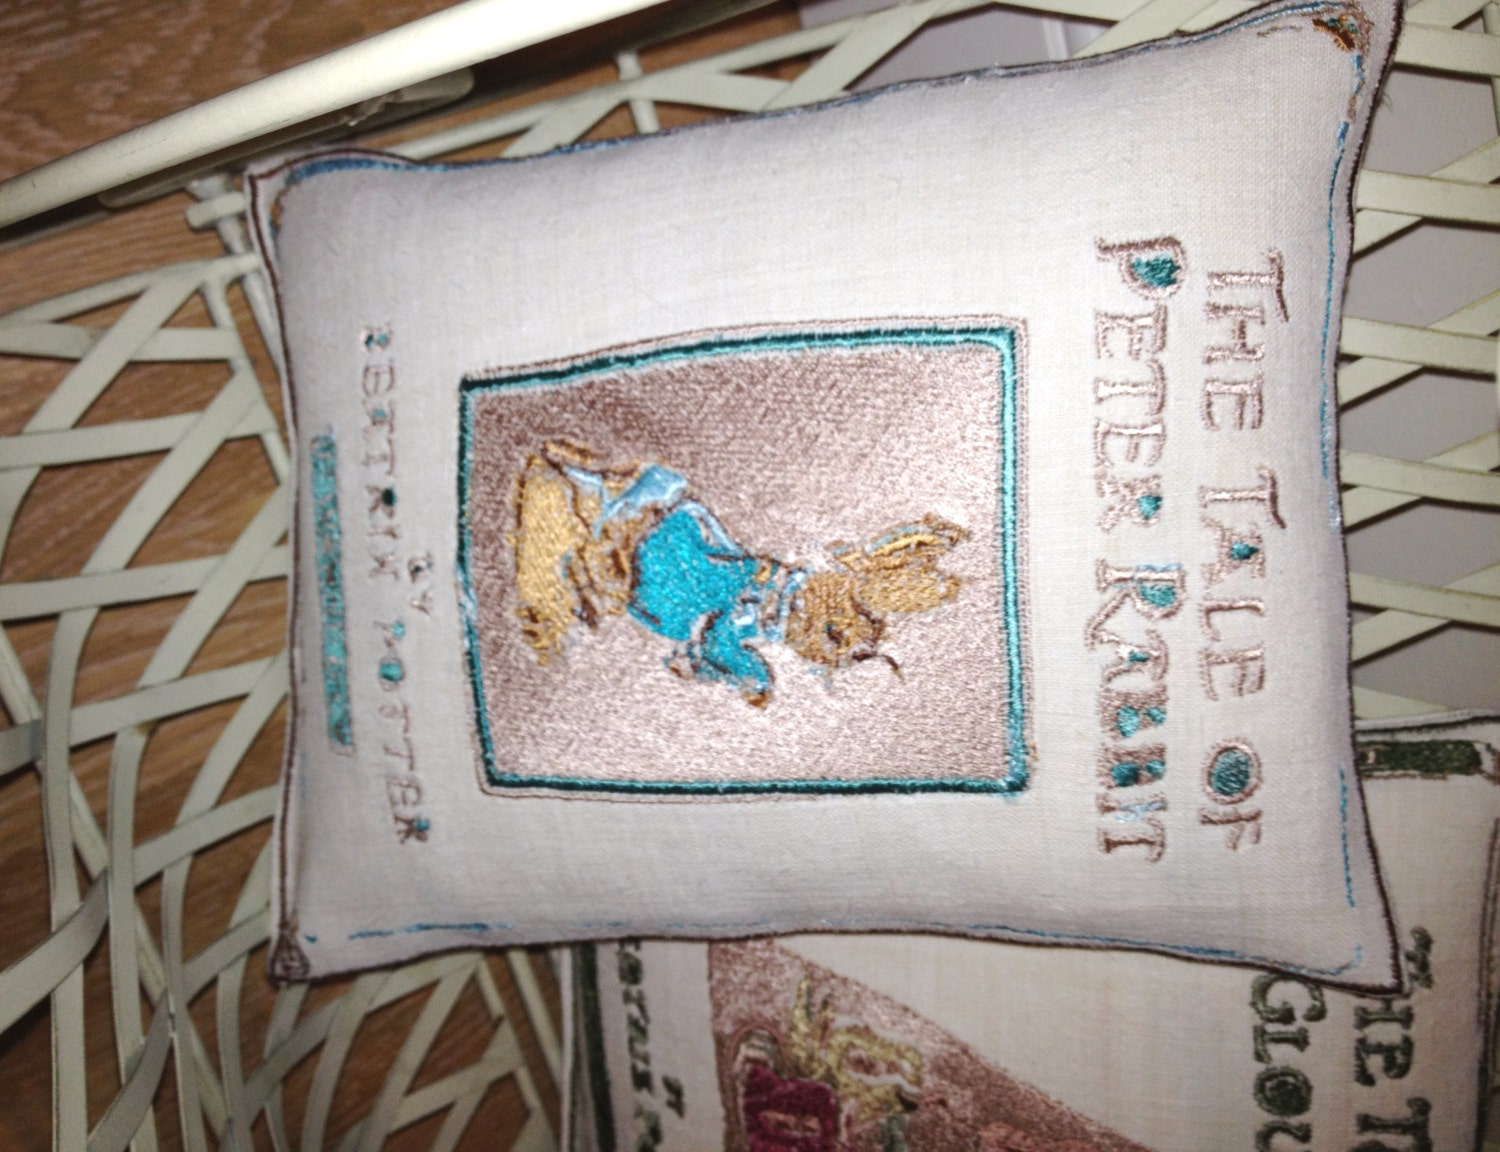 The Tale of Peter Rabbit, Beatrix Potter Artistic Embroidery Cushion Throw - Vintage Linen